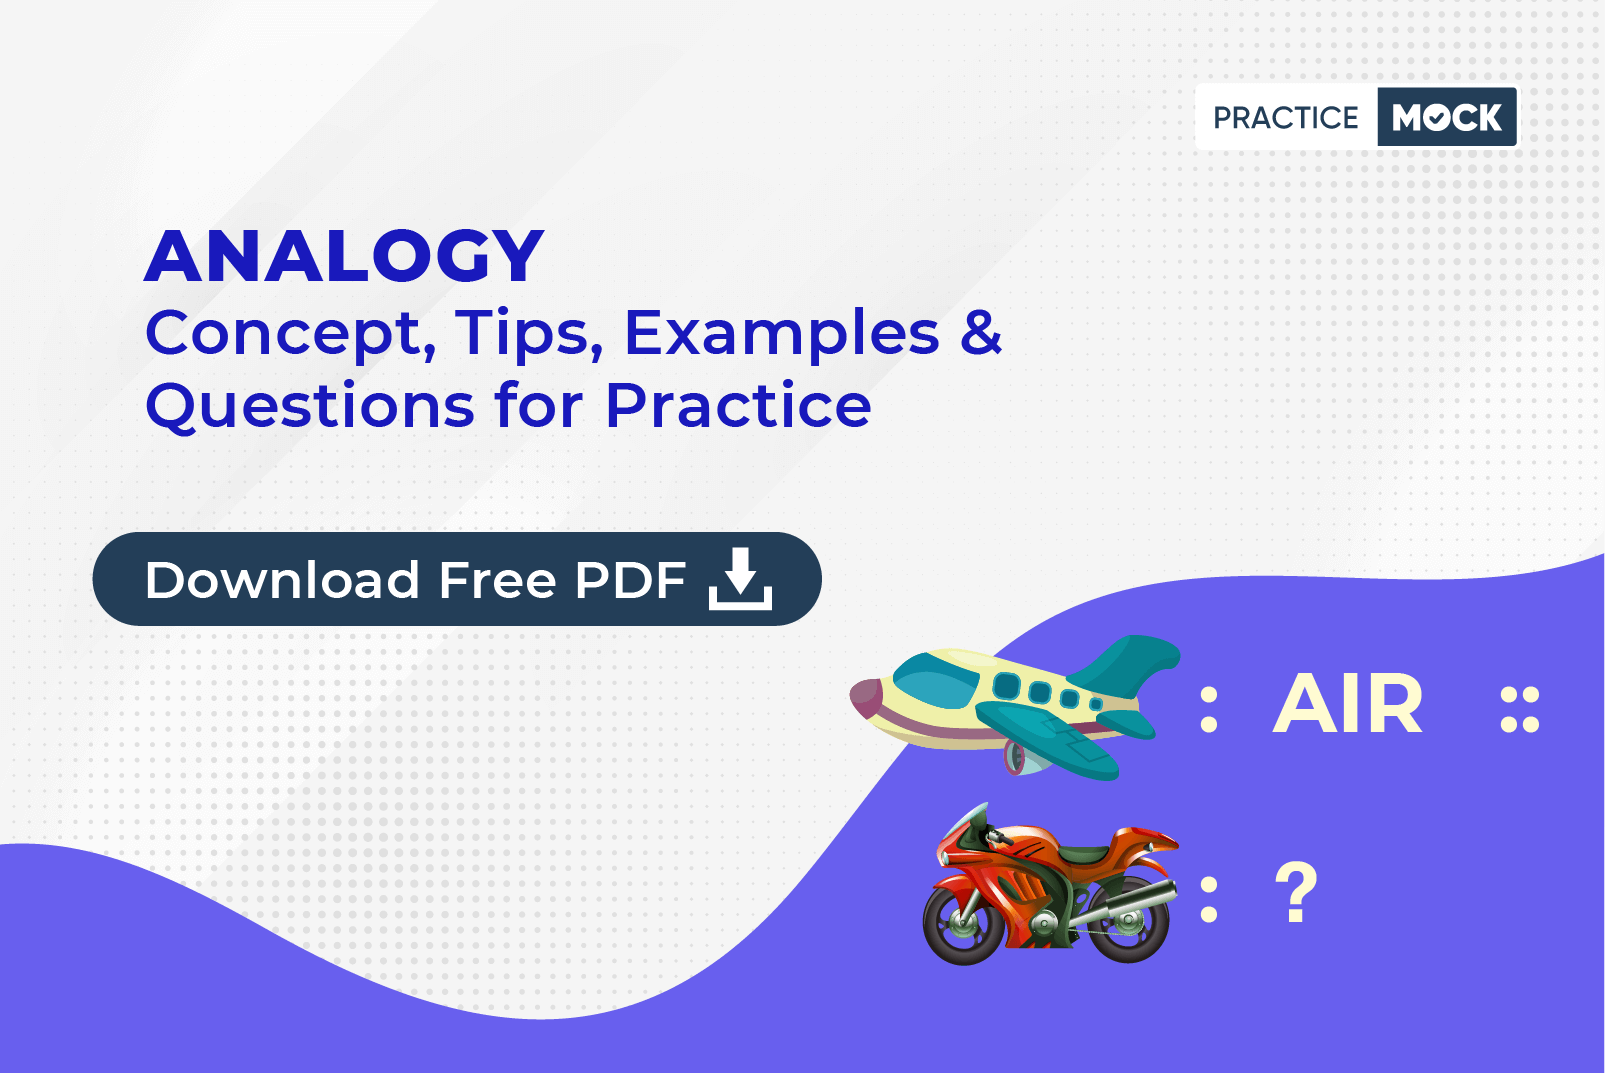 Analogy- Concept, Tips, Examples & Questions for Practice- Download Free PDF